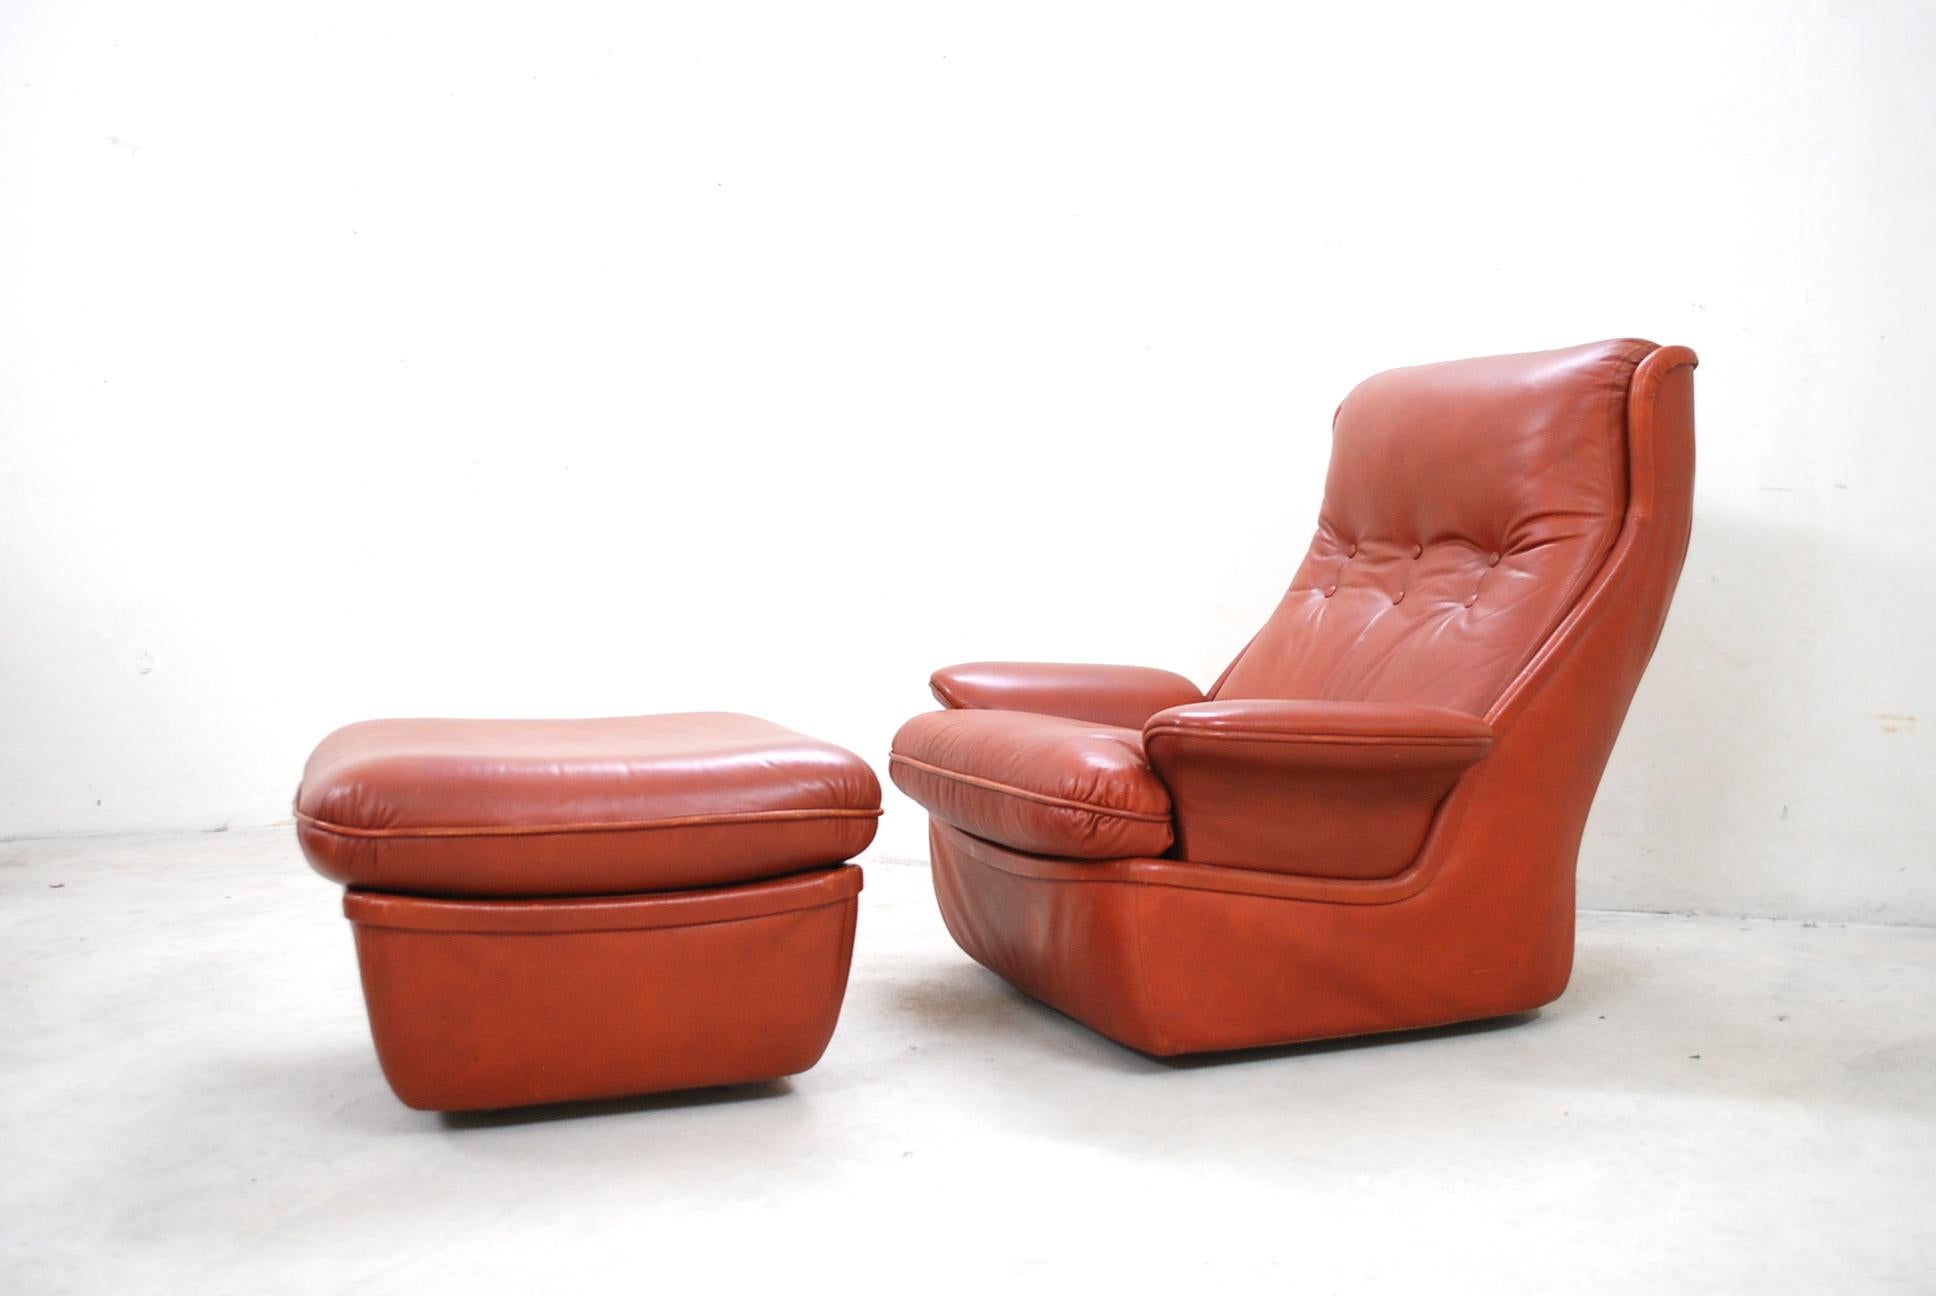 Lounge chair and ottoman from the 1970s of the Space Age Ära
Manufactured is unknown
Ox red aniline leather and fibreglass frame
4 small wheels on the base.

Dimensions:
Armchair:
Width 95 cm
Depth 95 cm
Height 92 cm
Seat height 39